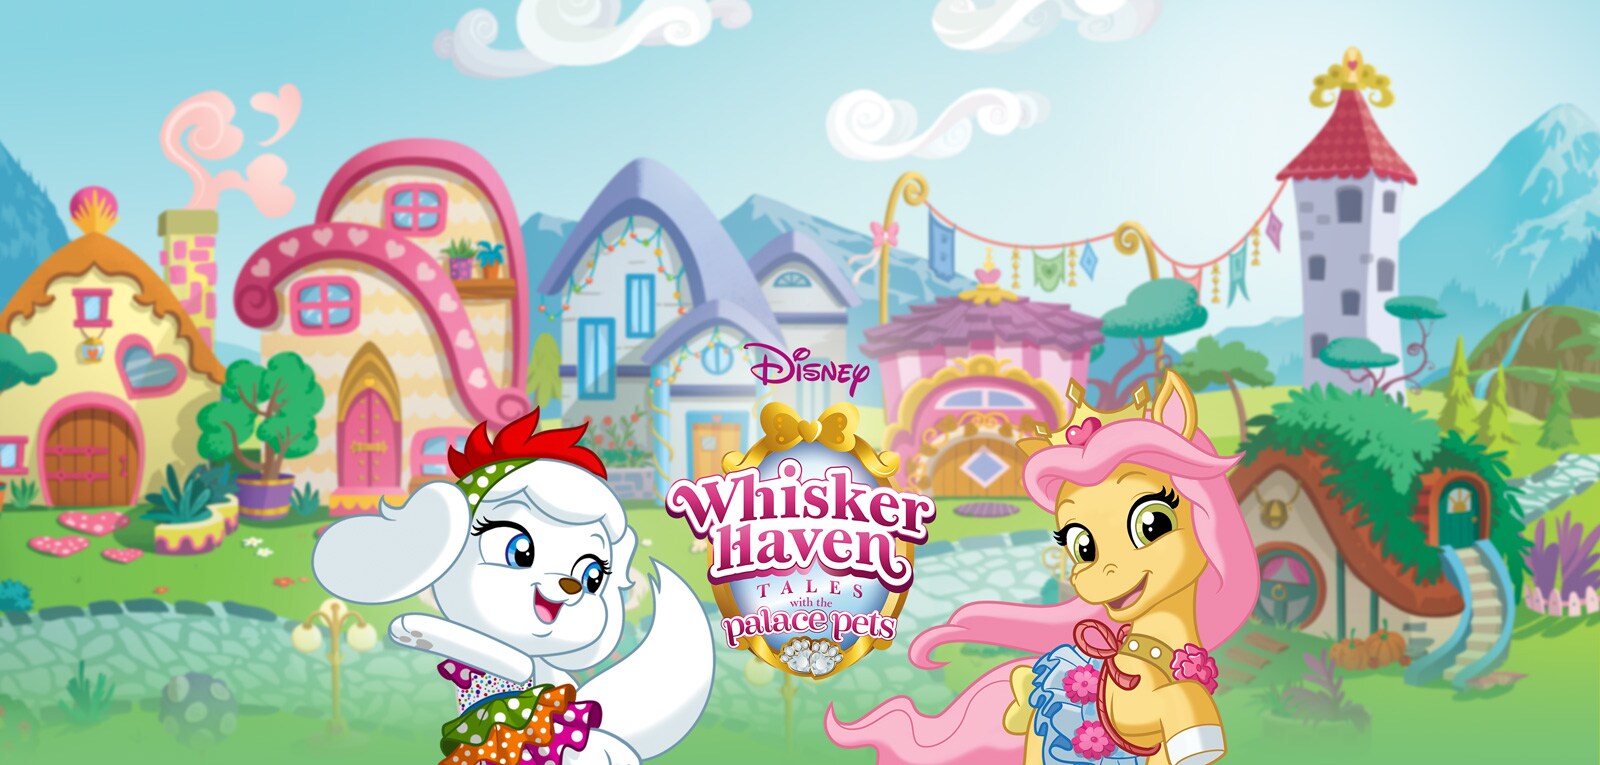 Whisker Haven Tales with the Characters Disney Pets Palace 